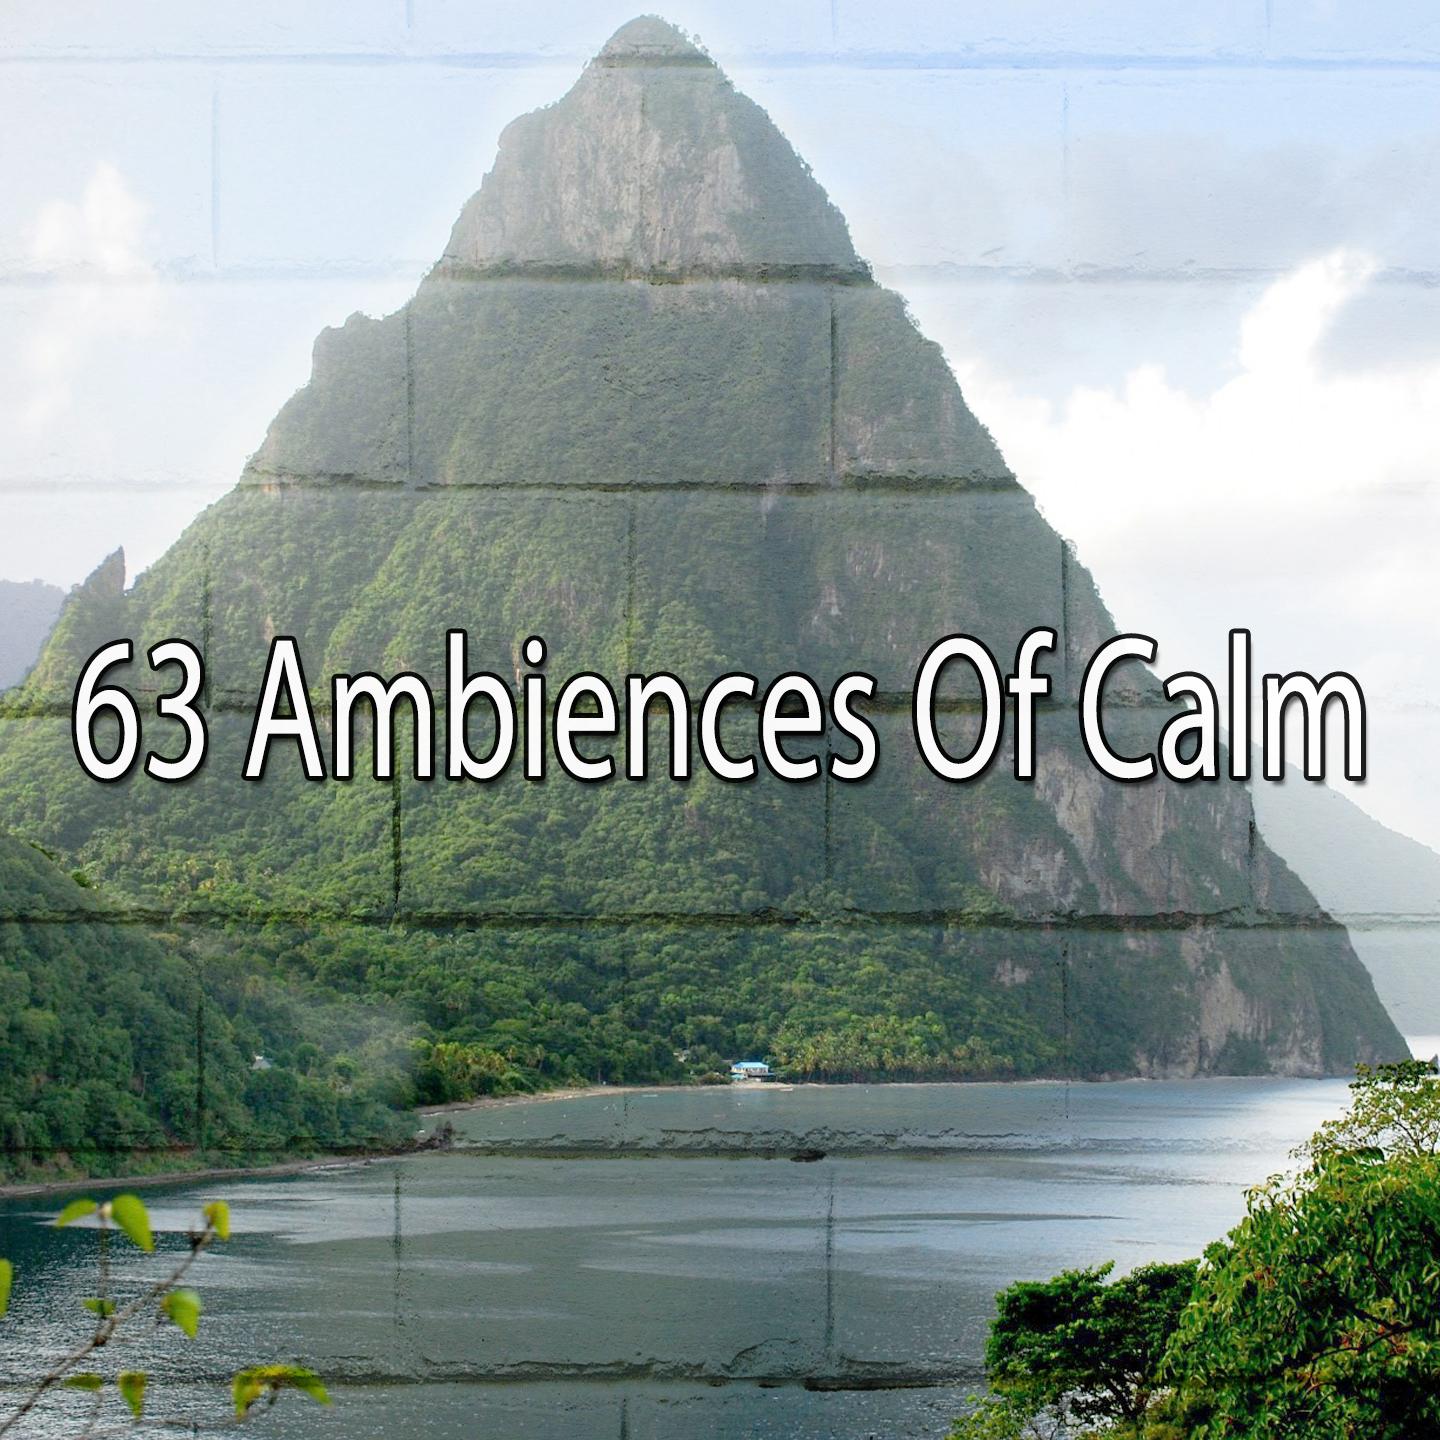 63 Ambiences of Calm